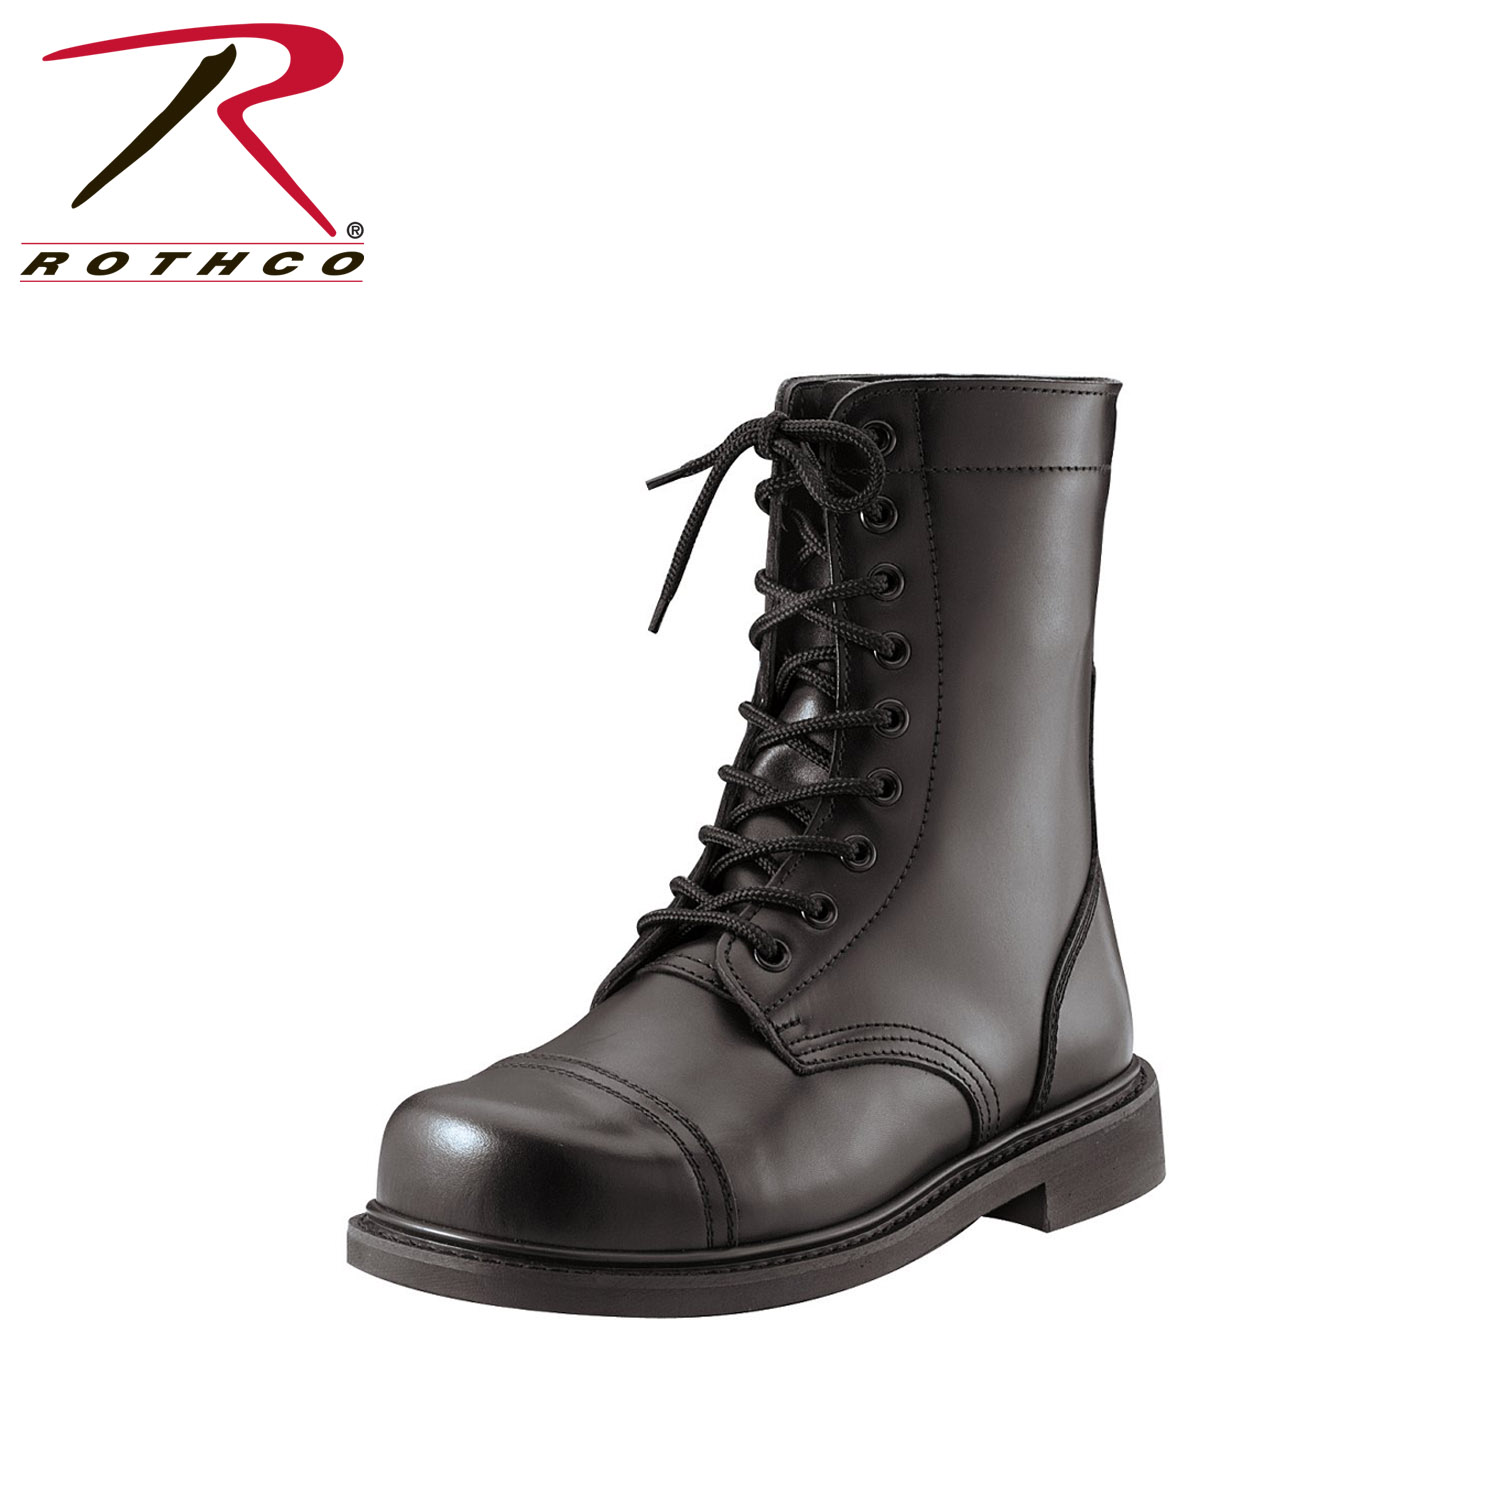 Rothco G.I. Type Steel Toe Combat Boot